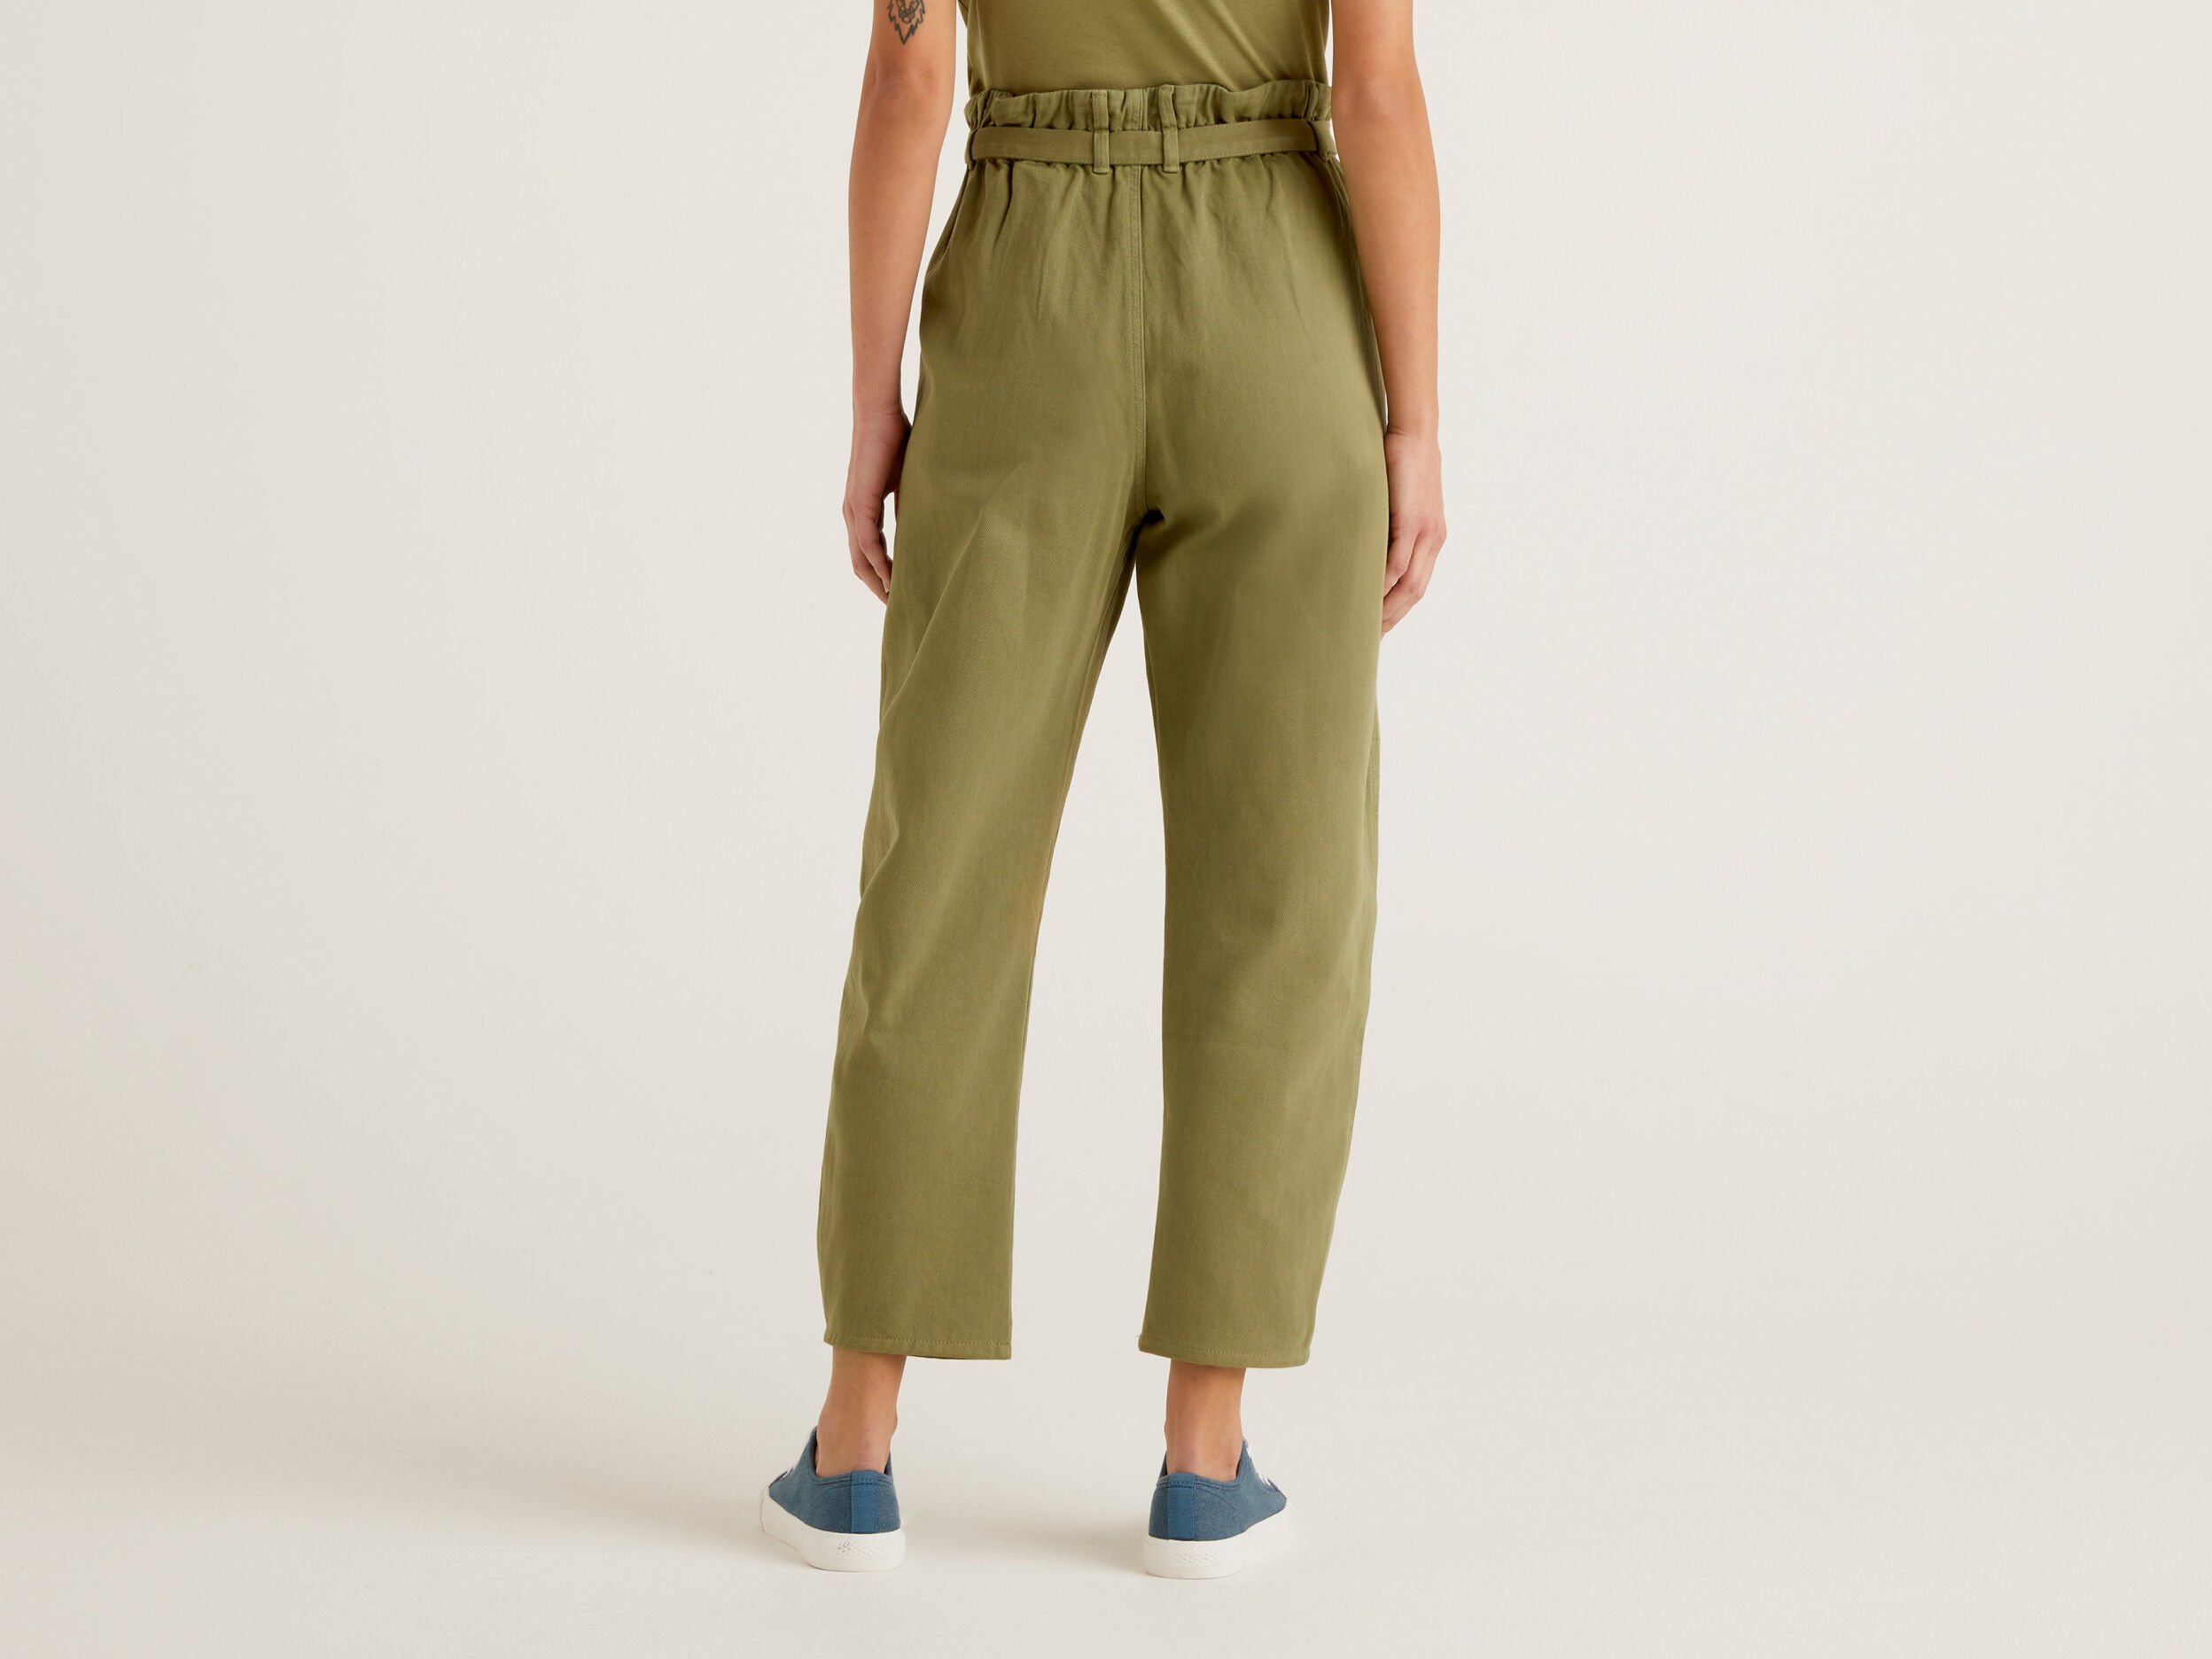 New Look paperbag tie waist straight leg trousers in camel | ASOS